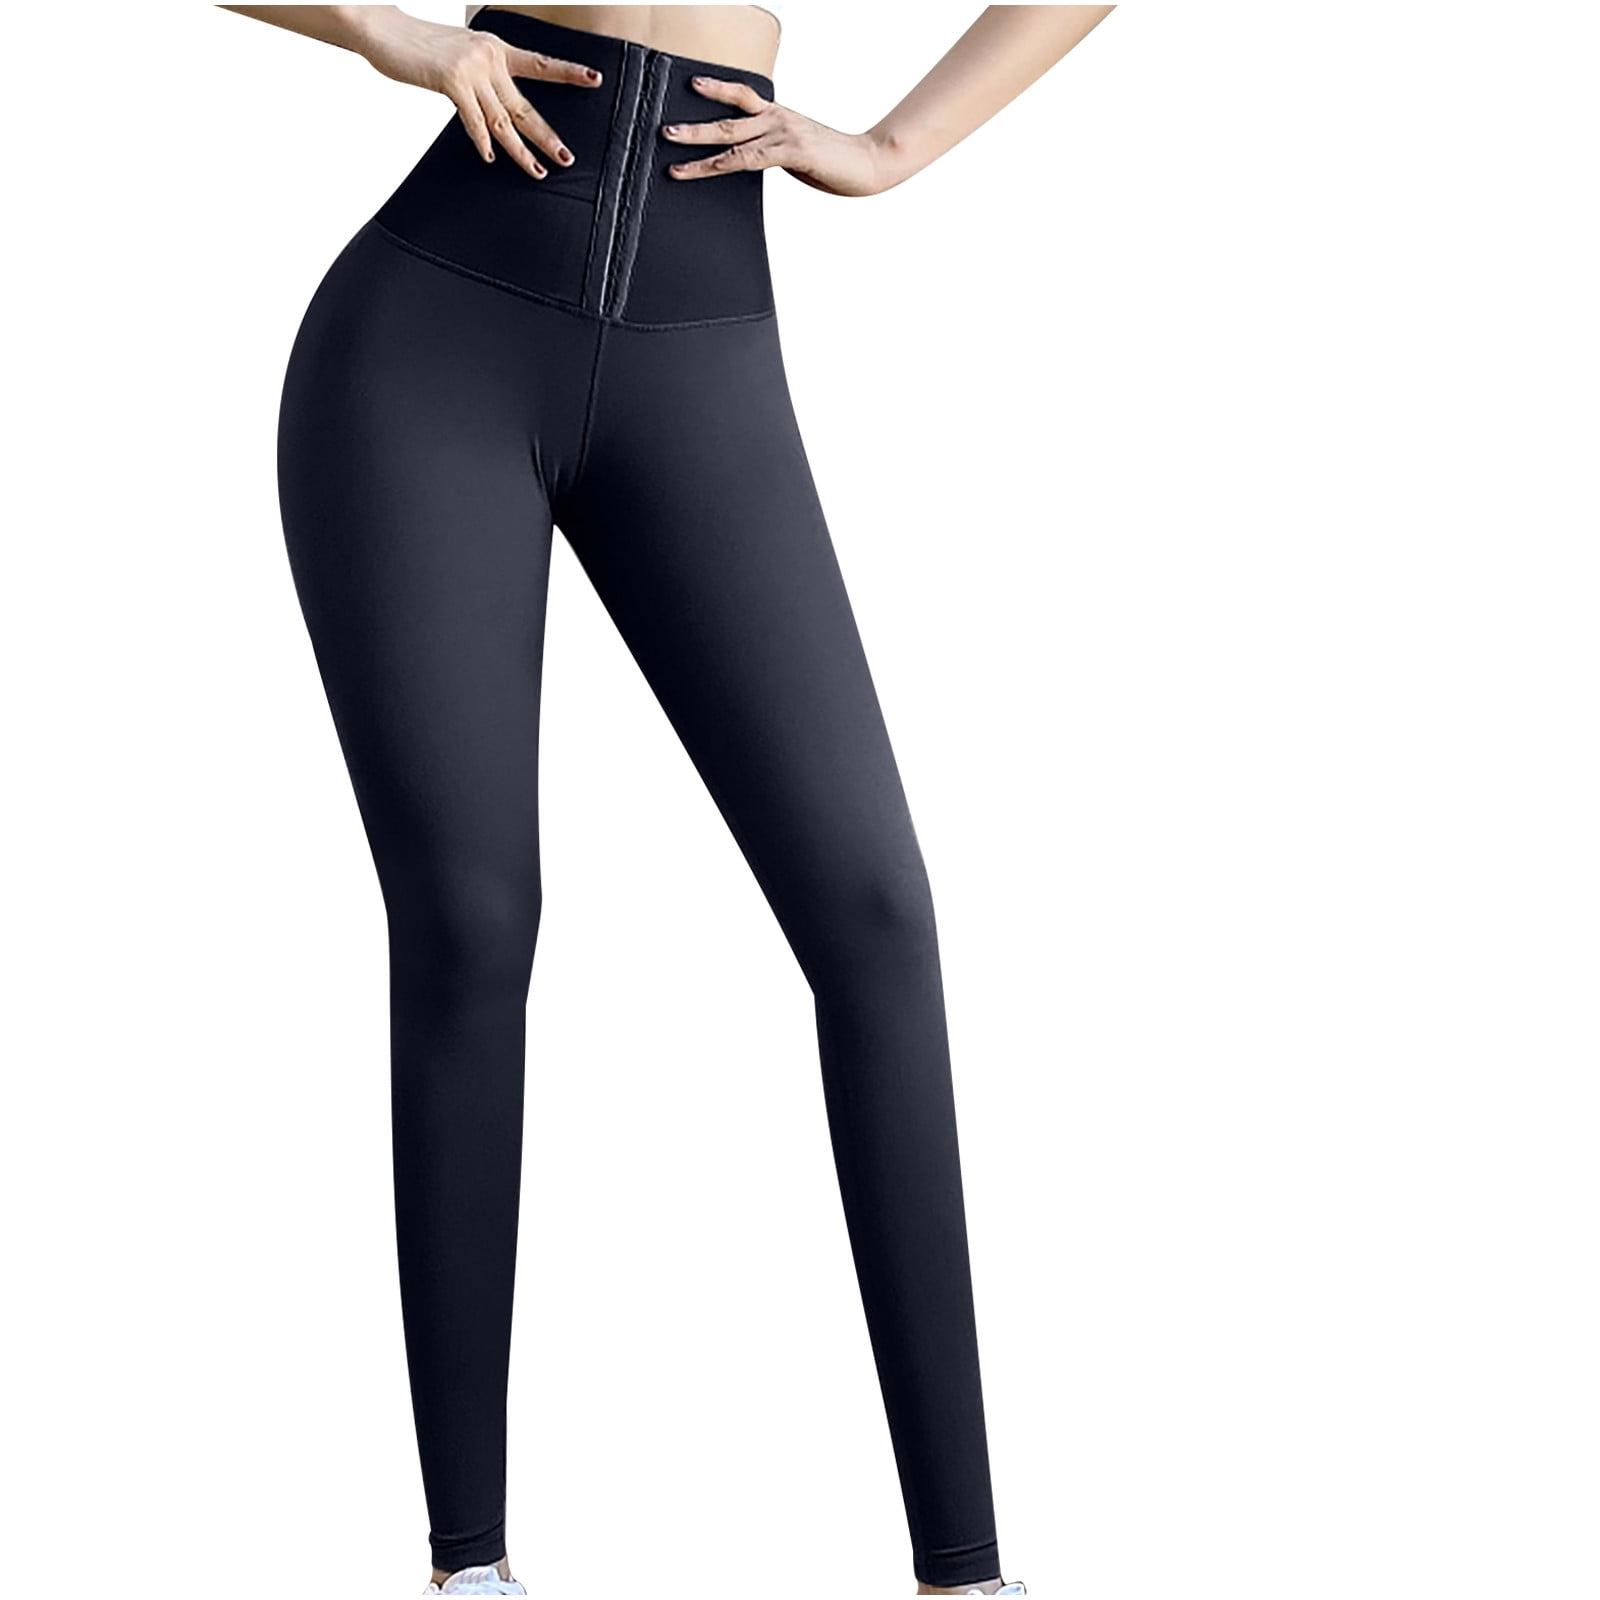 XFLWAM Womens Stretchy Thicken Warm Leggings Button Wide Leg Pant with  Pockets Tummy Control Workout Pants Yoga Tights Black XXL 